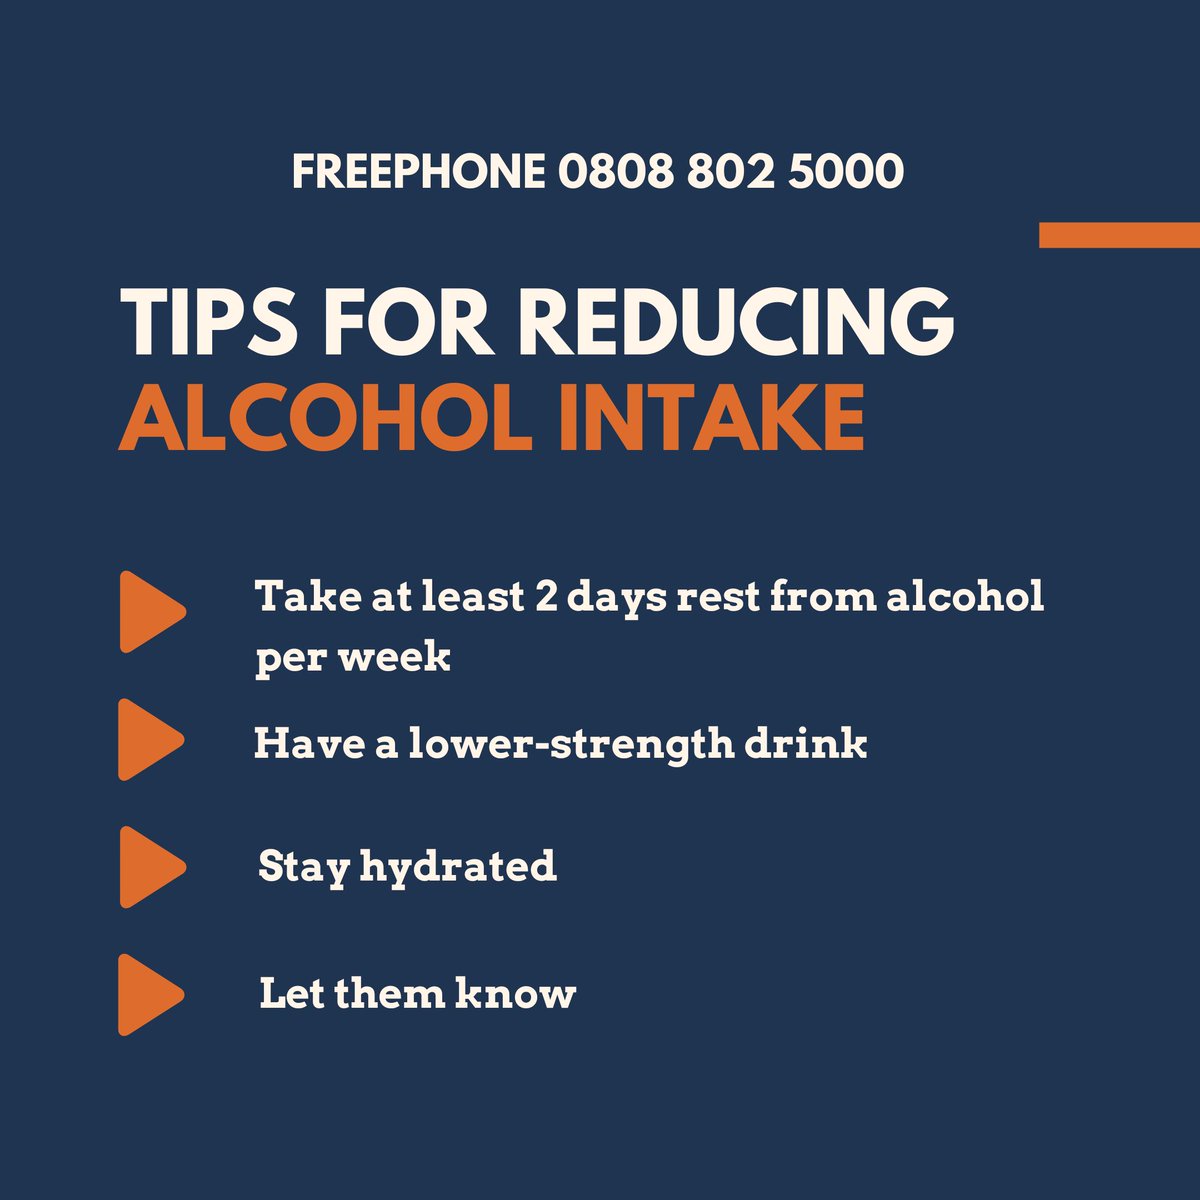 Embark on a journey to mindful drinking with SDAC's support. Seek guidance from your GP or 🌐 visit our website surreydrugandalcoholcare.org.uk for additional help. 📞 If you or someone you know needs help, call 0808 802 5000 or text to 07537 432411.  #SDAC #SDACSupport #MindfulDrinking